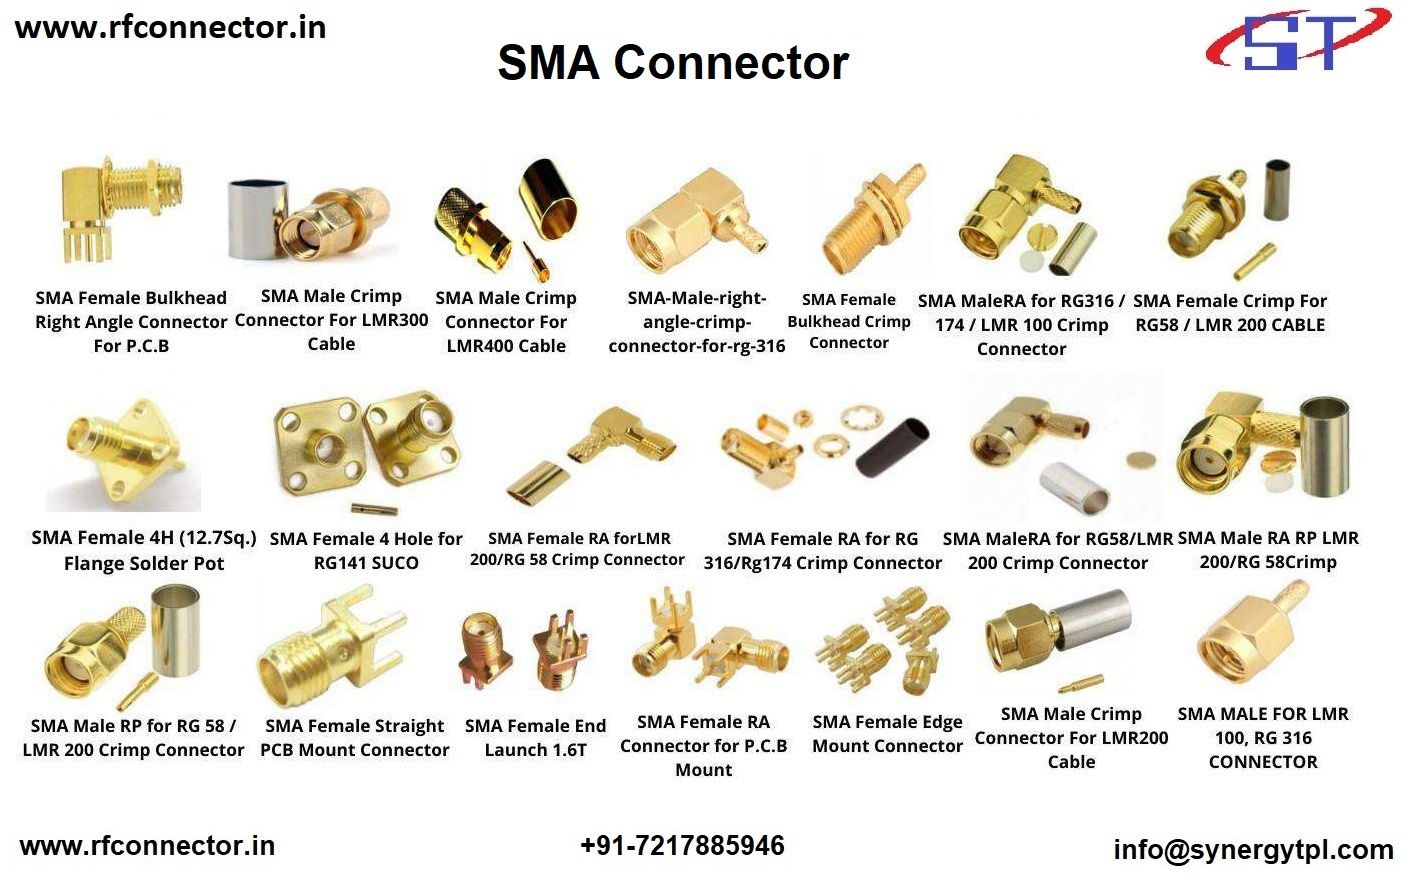 SMA Male RIGHT ANGLE FOR LMR-400 CLAMP CONNECTOR